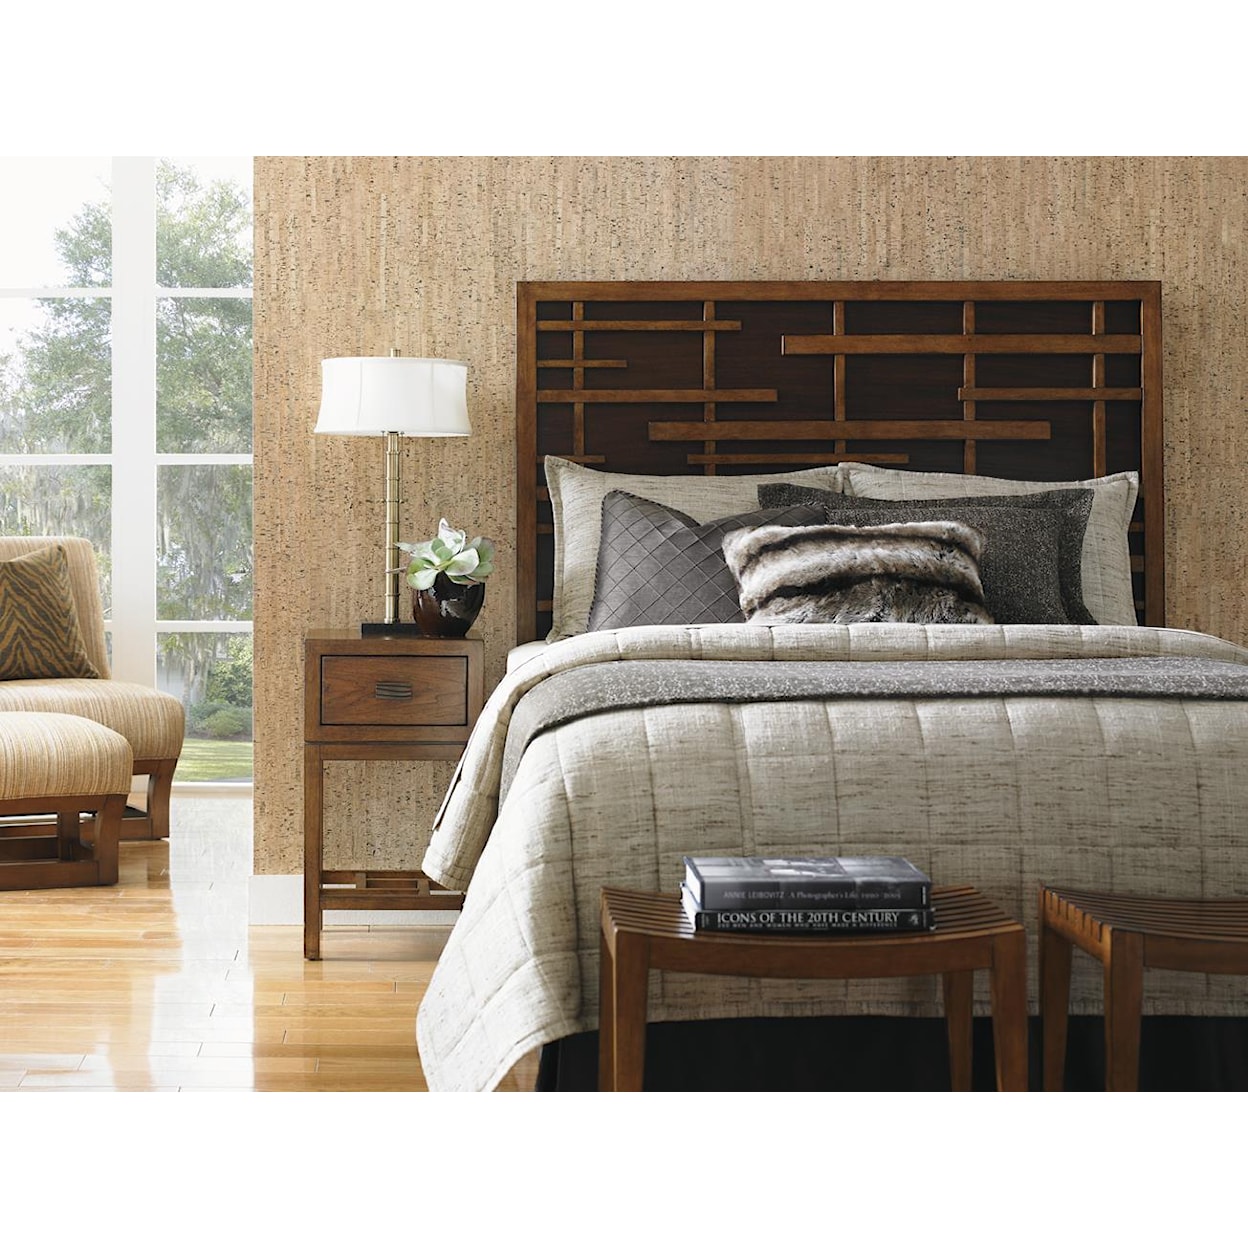 Tommy Bahama Home Island Fusion Shanghai Panel Bed 6/0